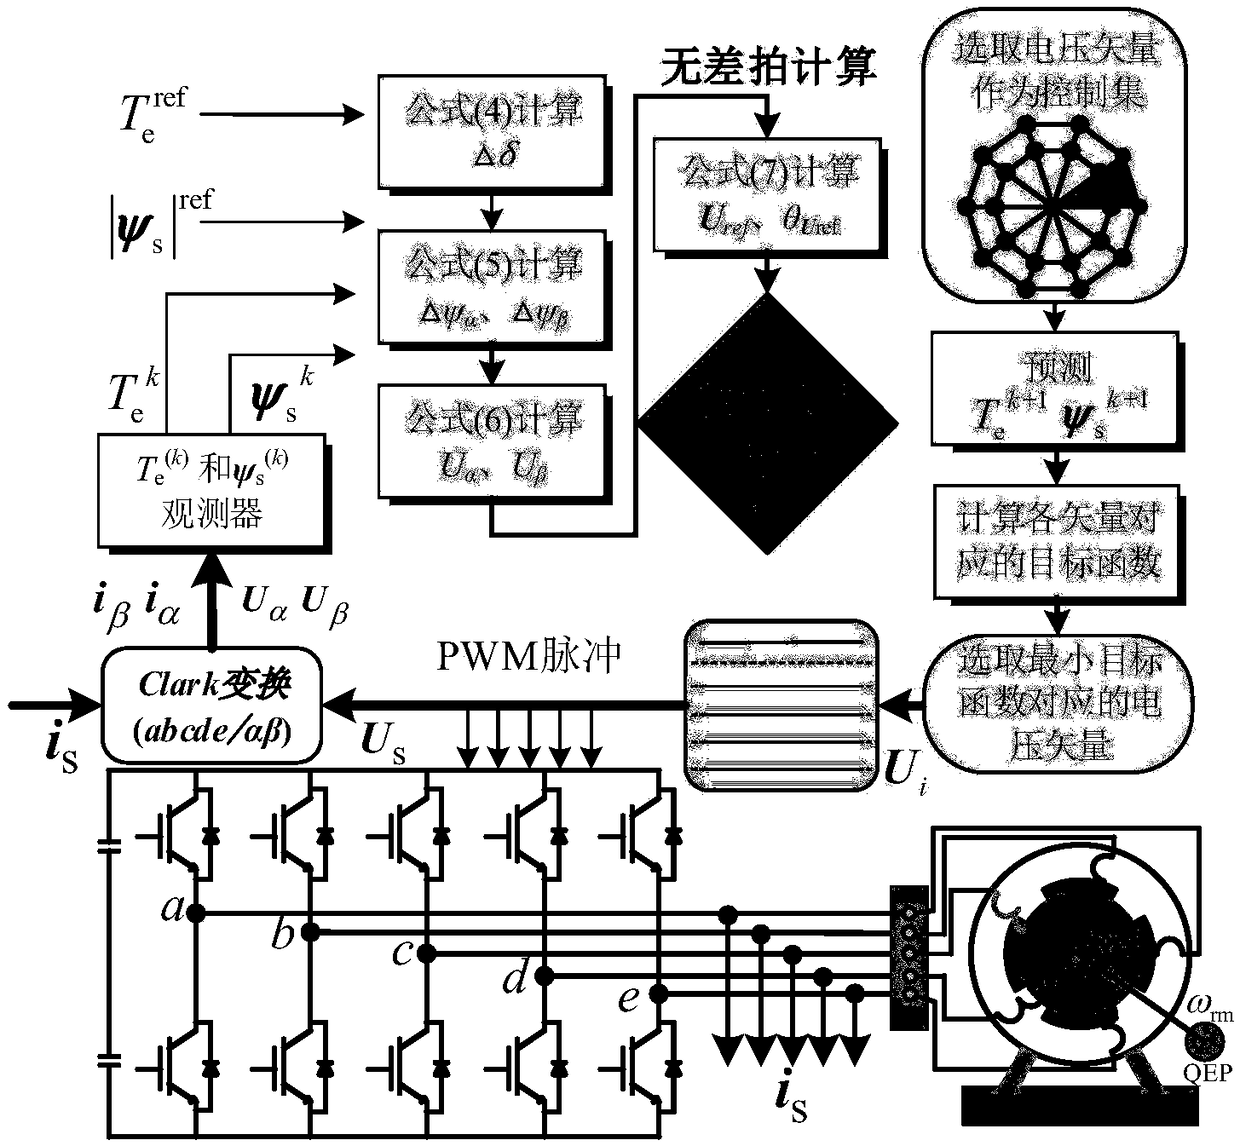 A model predictive torque control method for five-phase permanent magnet synchronous motor